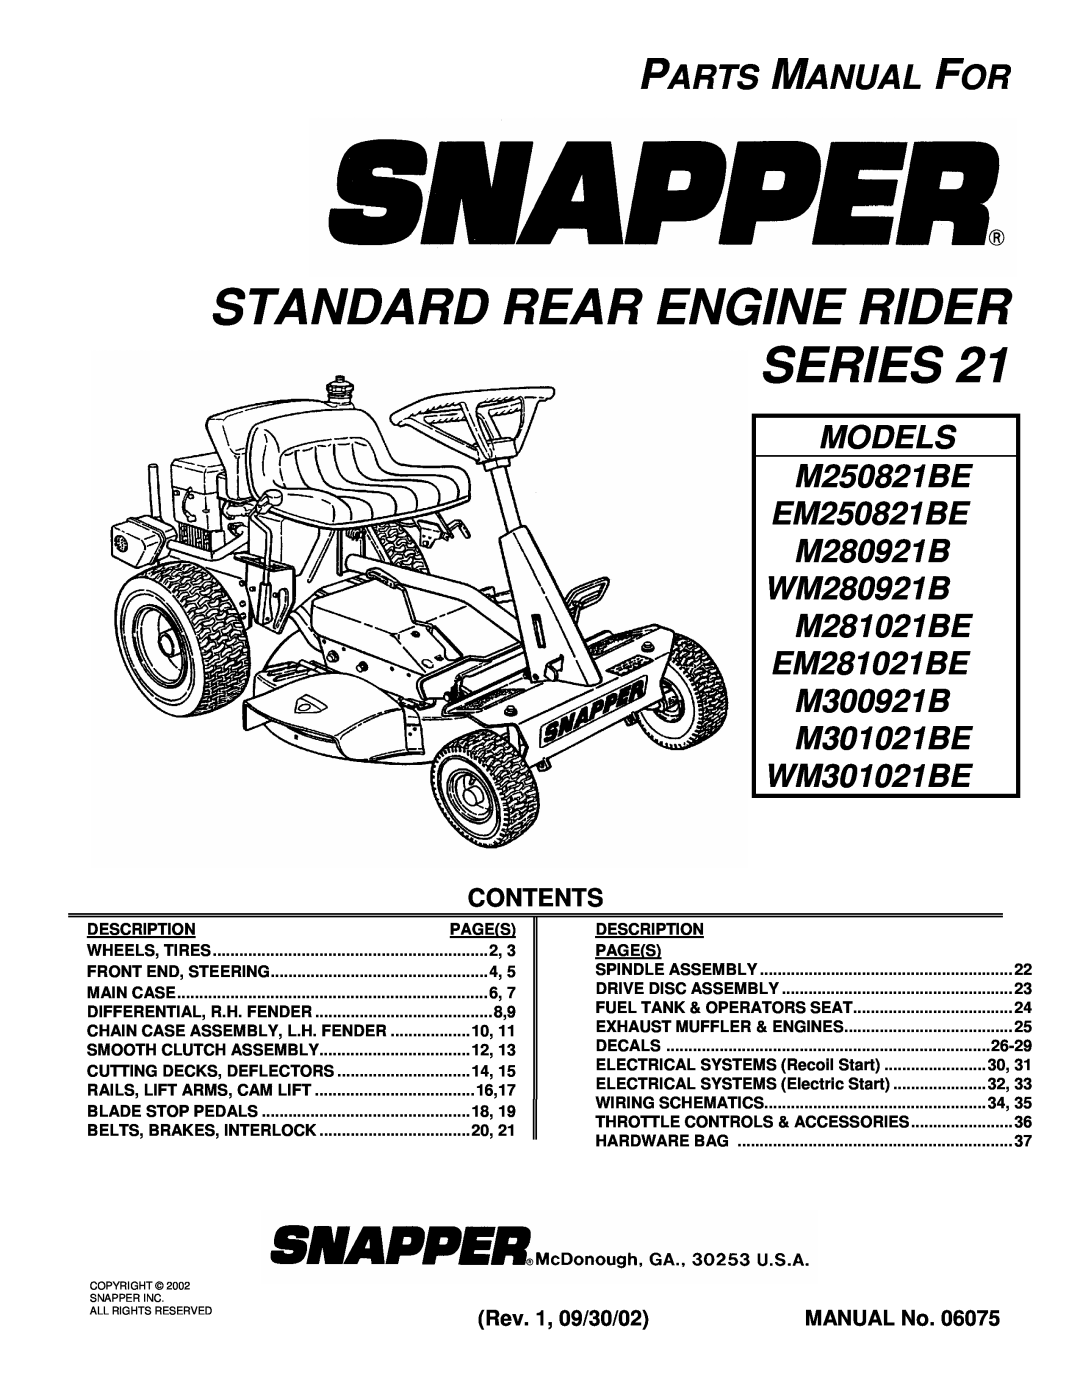 Snapper M280921B, M300921B, M281021BE manual Contents, Standard Rear Engine Rider Series, Parts Manual For, WM301021BE 